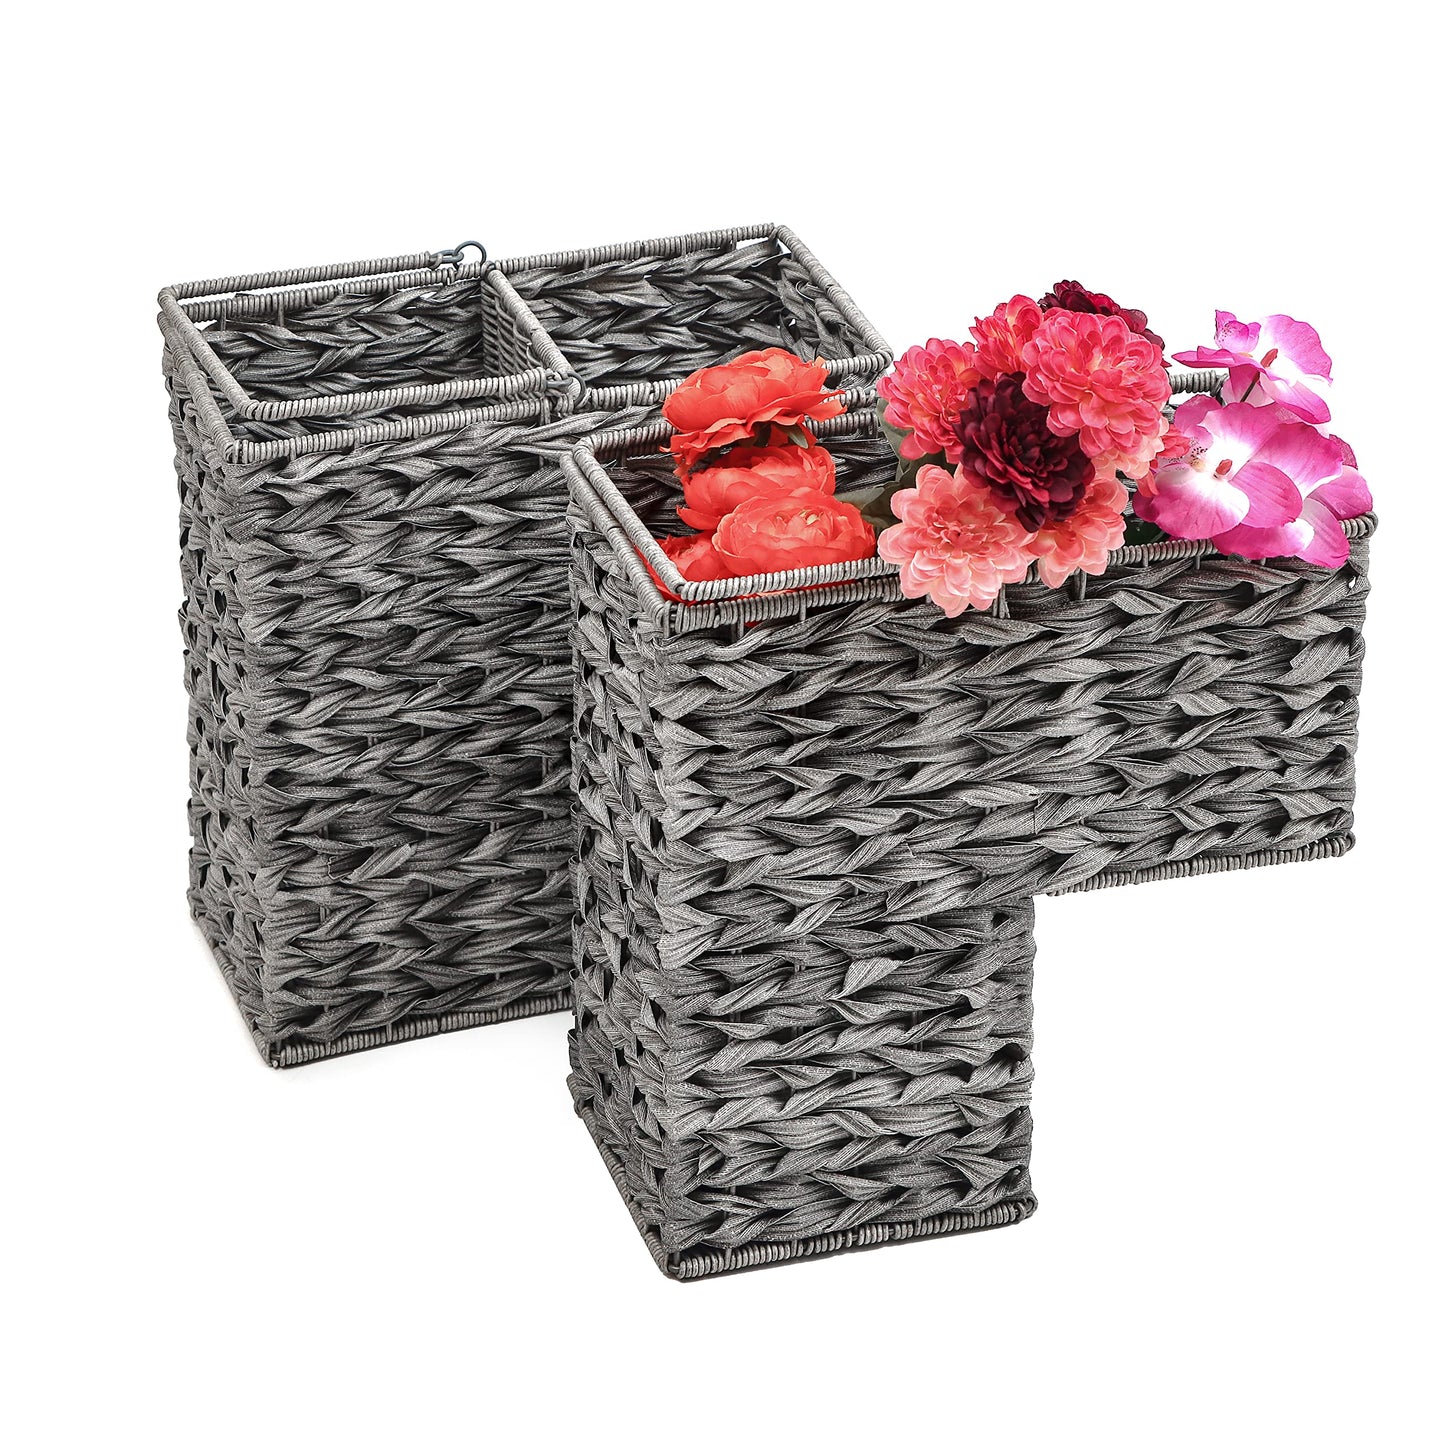 14.5" Plastic Wicker Storage Stair Basket Set With Handles by Trademark Innovations (Set of 2, Grey)